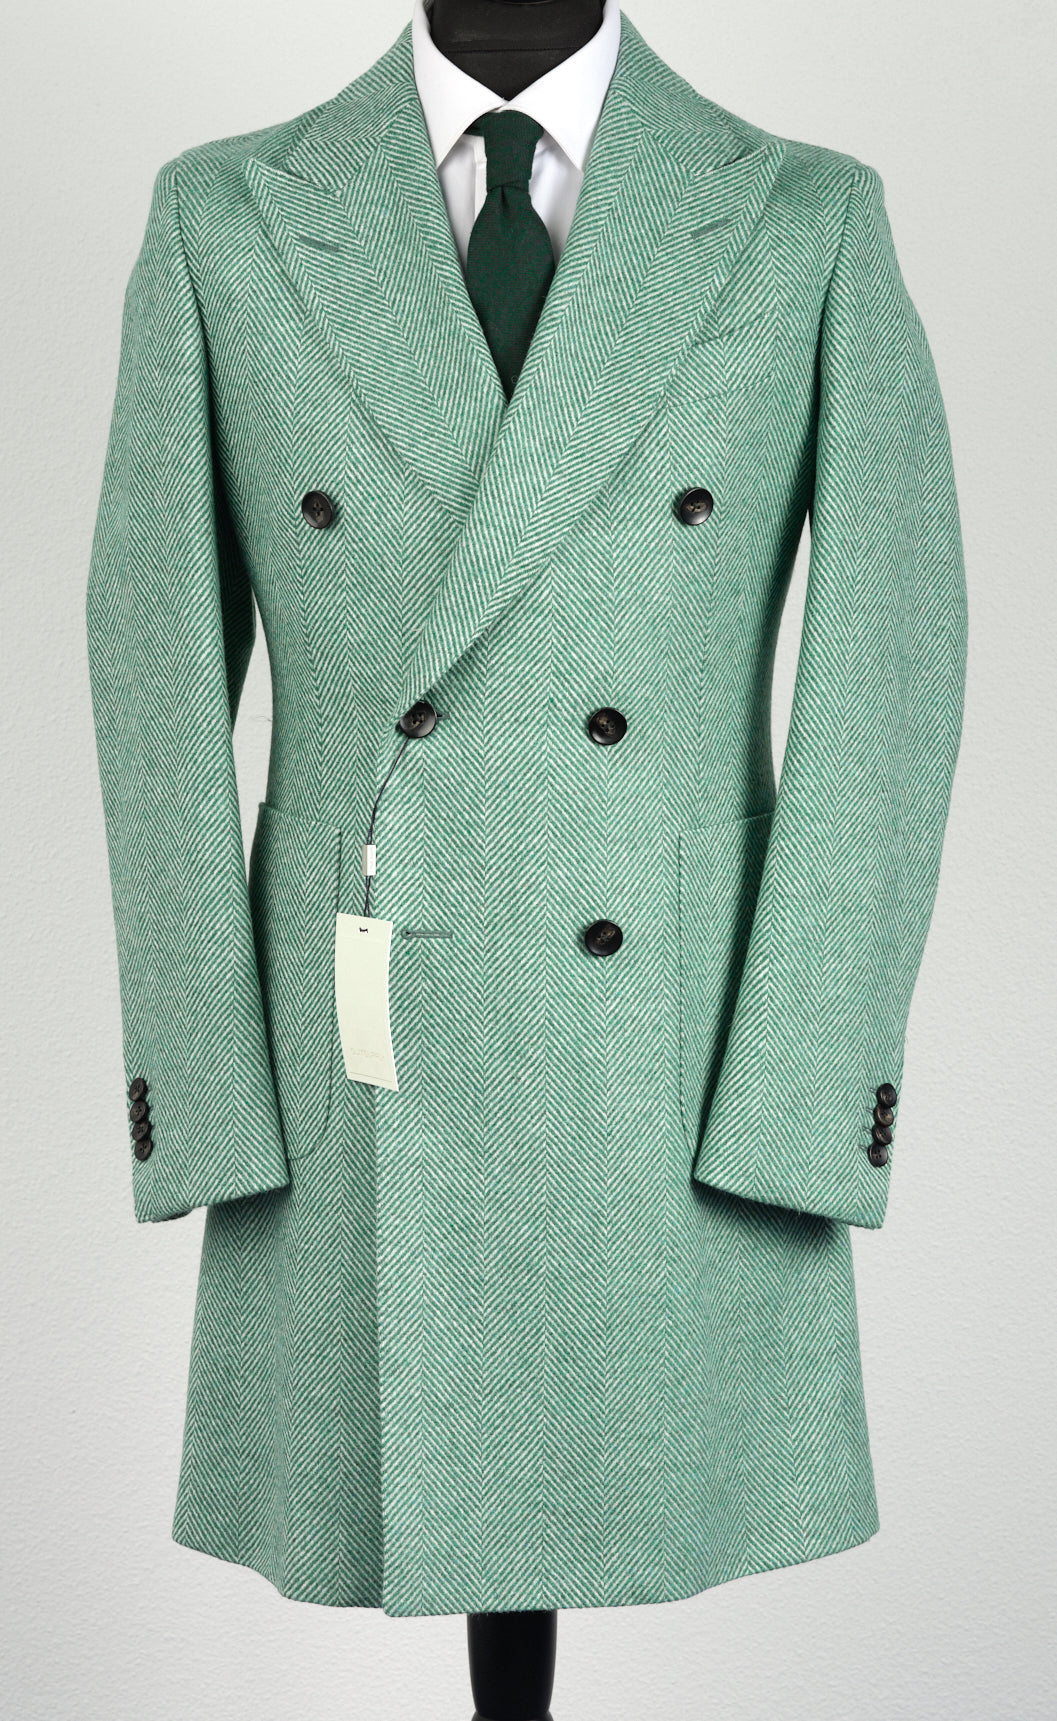 New Suitsupply Lavello Green/Teal Herringbone Pure Wool DB Coat - Size 38R